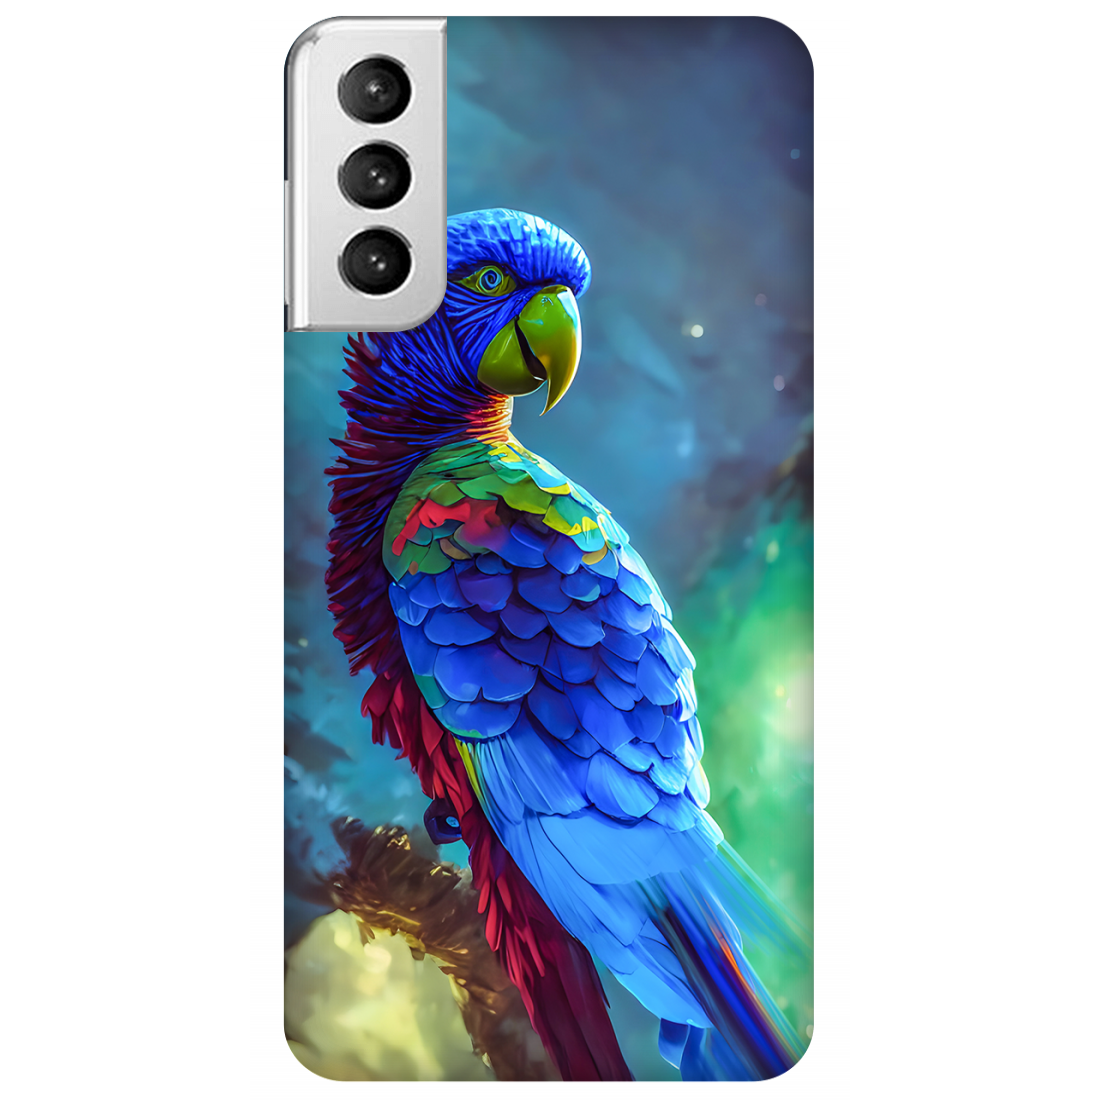 Vibrant Parrot in Dreamy Atmosphere Case Samsung Galaxy S21 Plus 5G